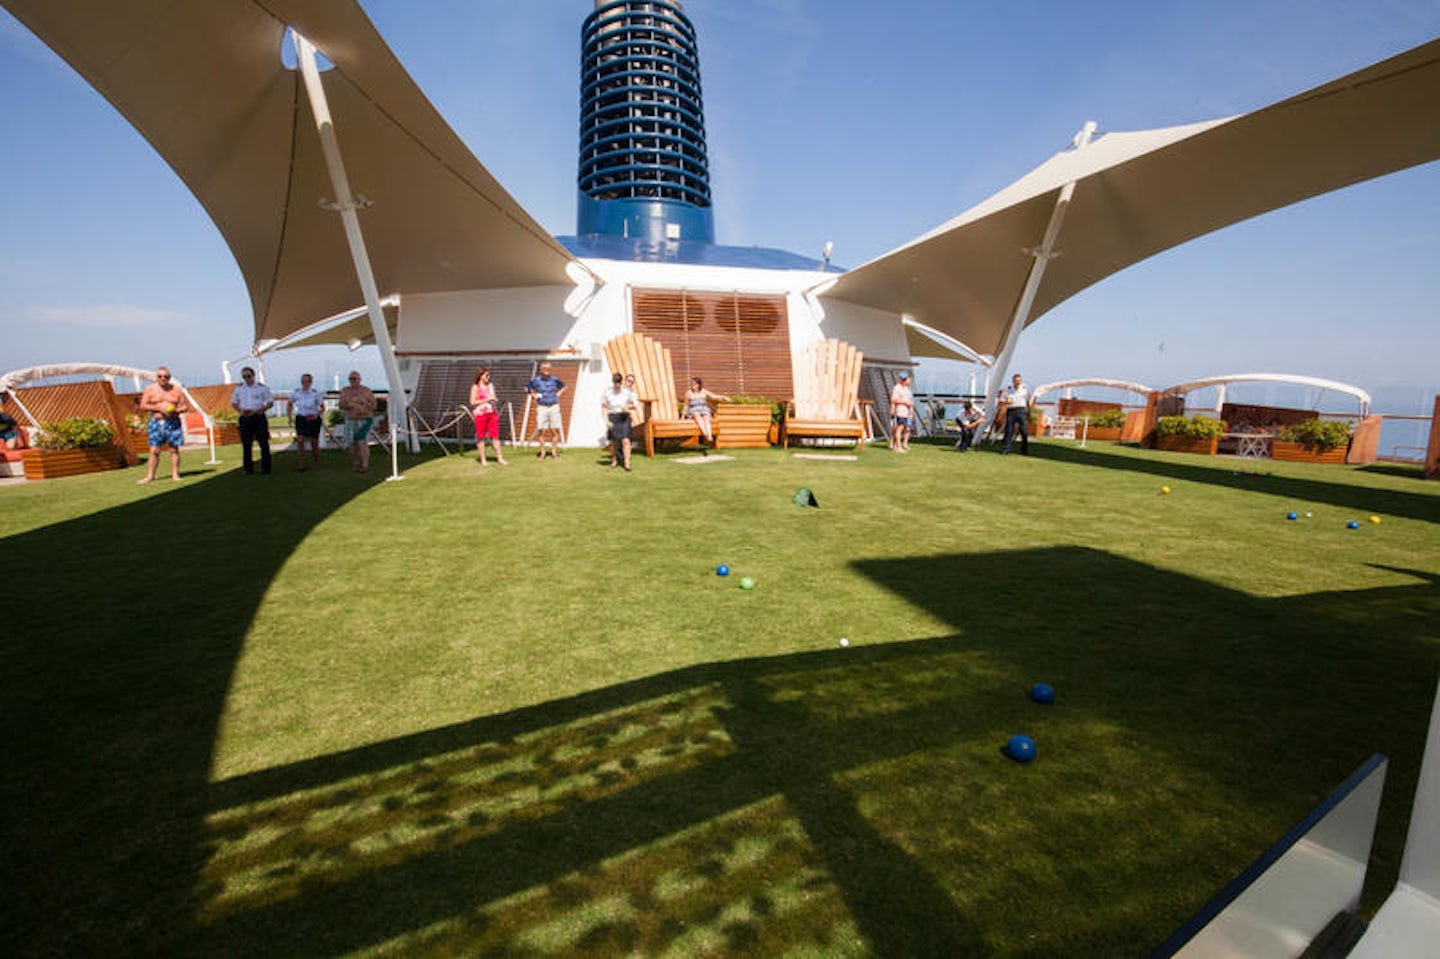 Bocce lawn bowling on Celebrity Reflection